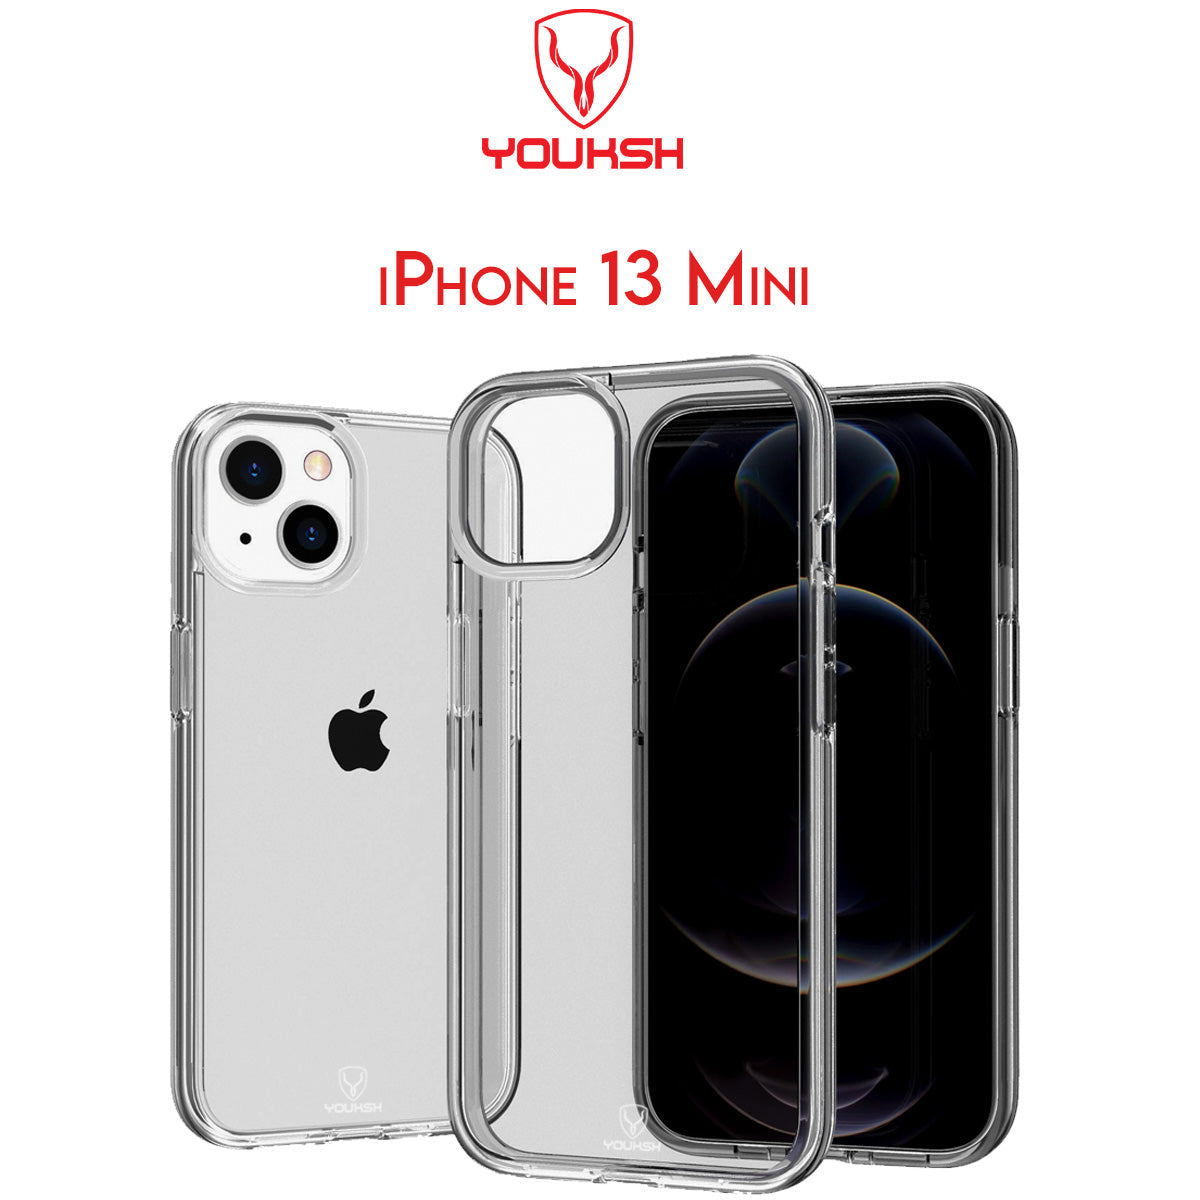 YOUSKH Apple iPhone 13 Mini (5.4) Transparent Case - Youksh iPhone 13 (6.1) Transparent Cover - Transparent Soft Shock Proof Jelly Back Cover.